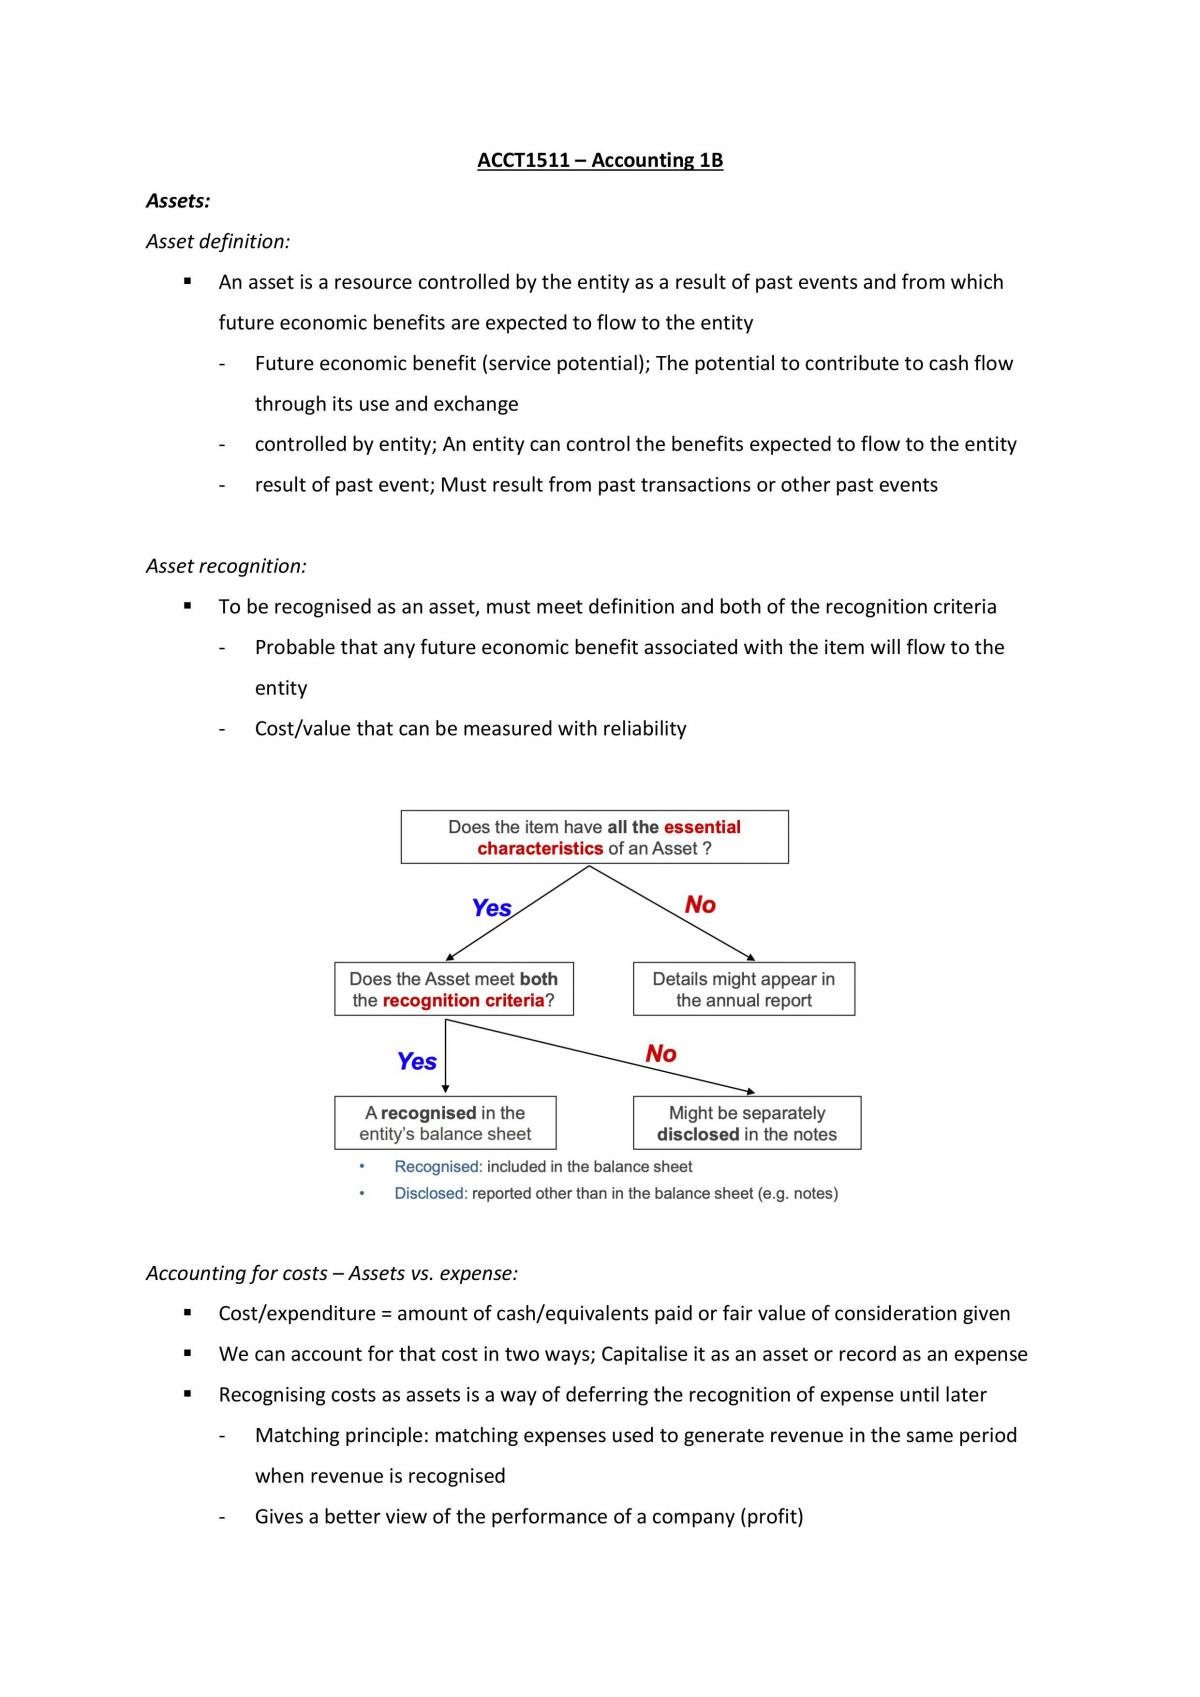 ACCT1511 HD Notes *94/100* - Page 1